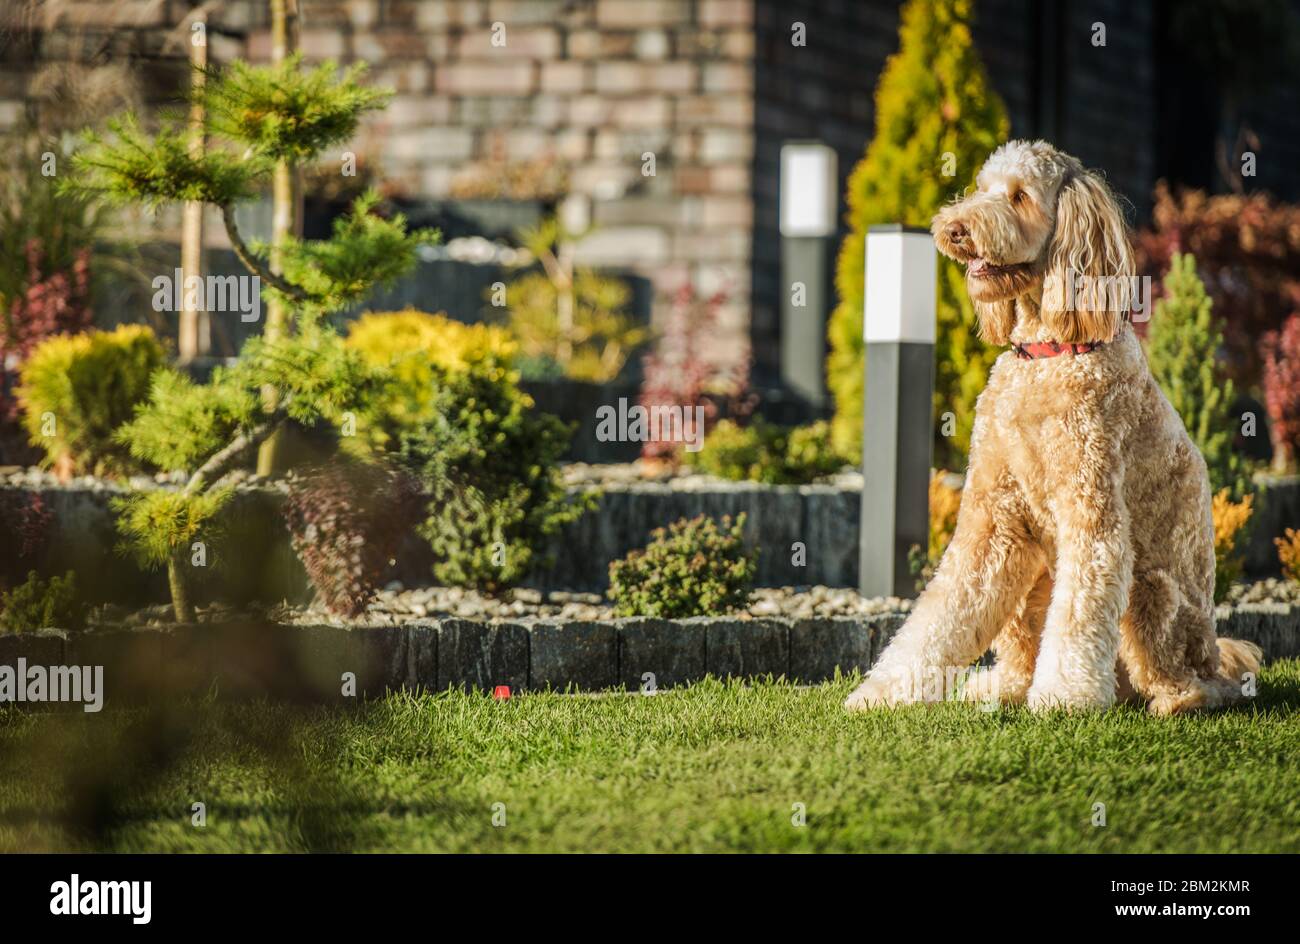 Tan Color Goldendoodle Dog Sitting Down In Backyard Area Of House And Attentively Looking Ahead. Stock Photo